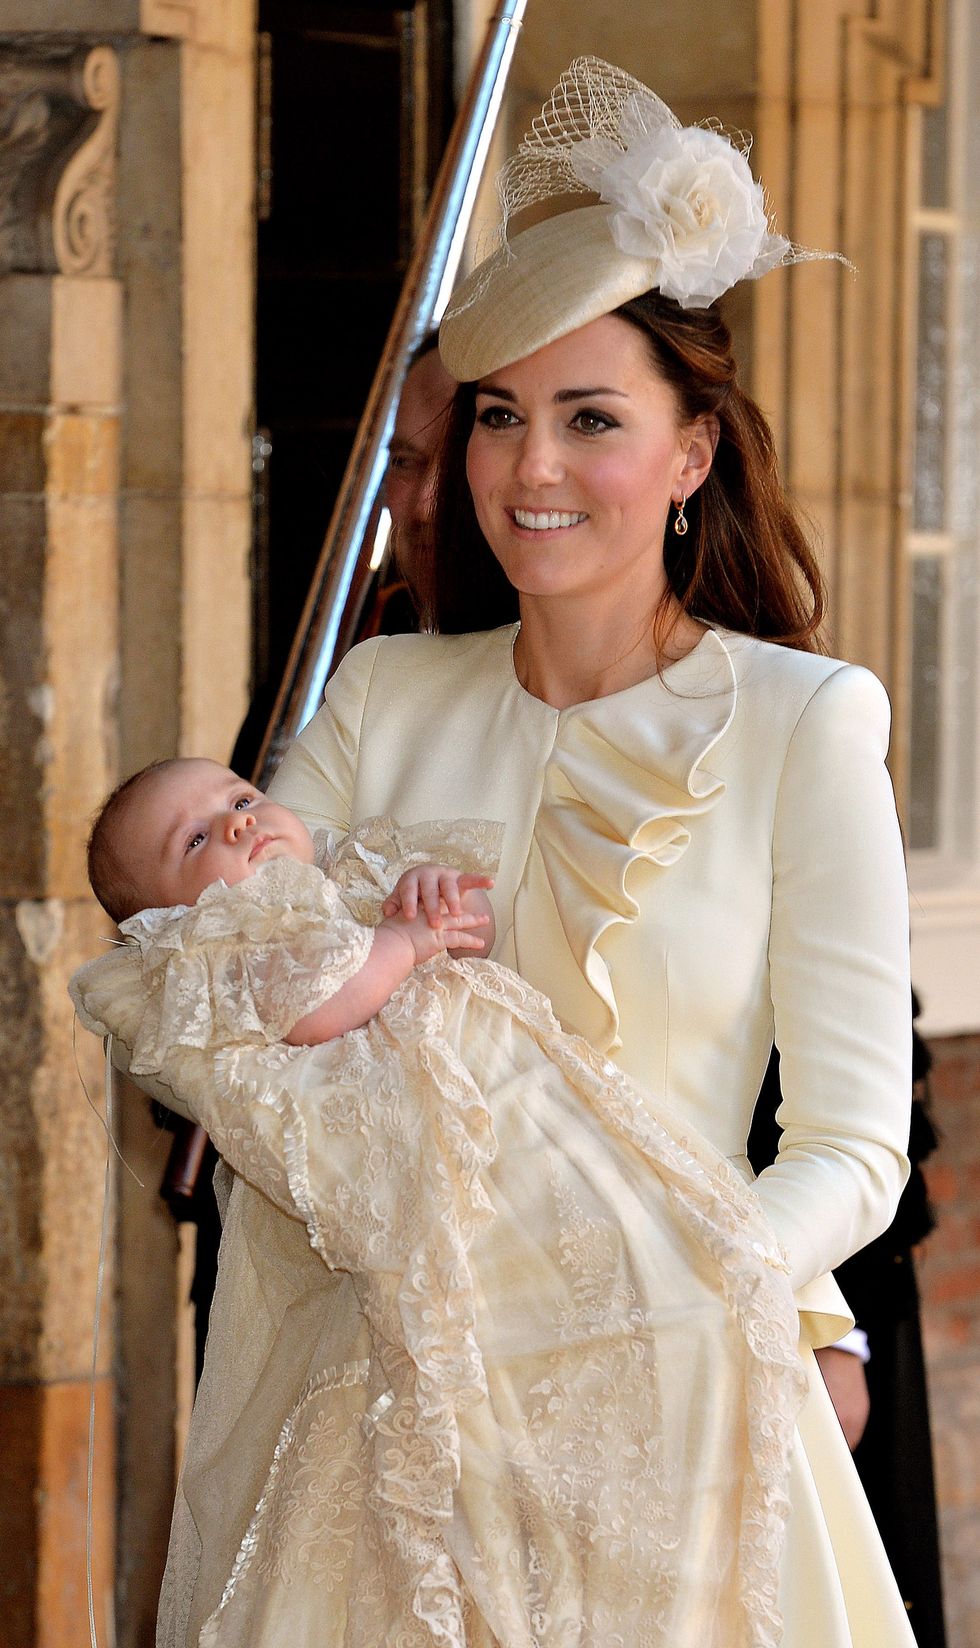 Prince Louis' godparents have been announced